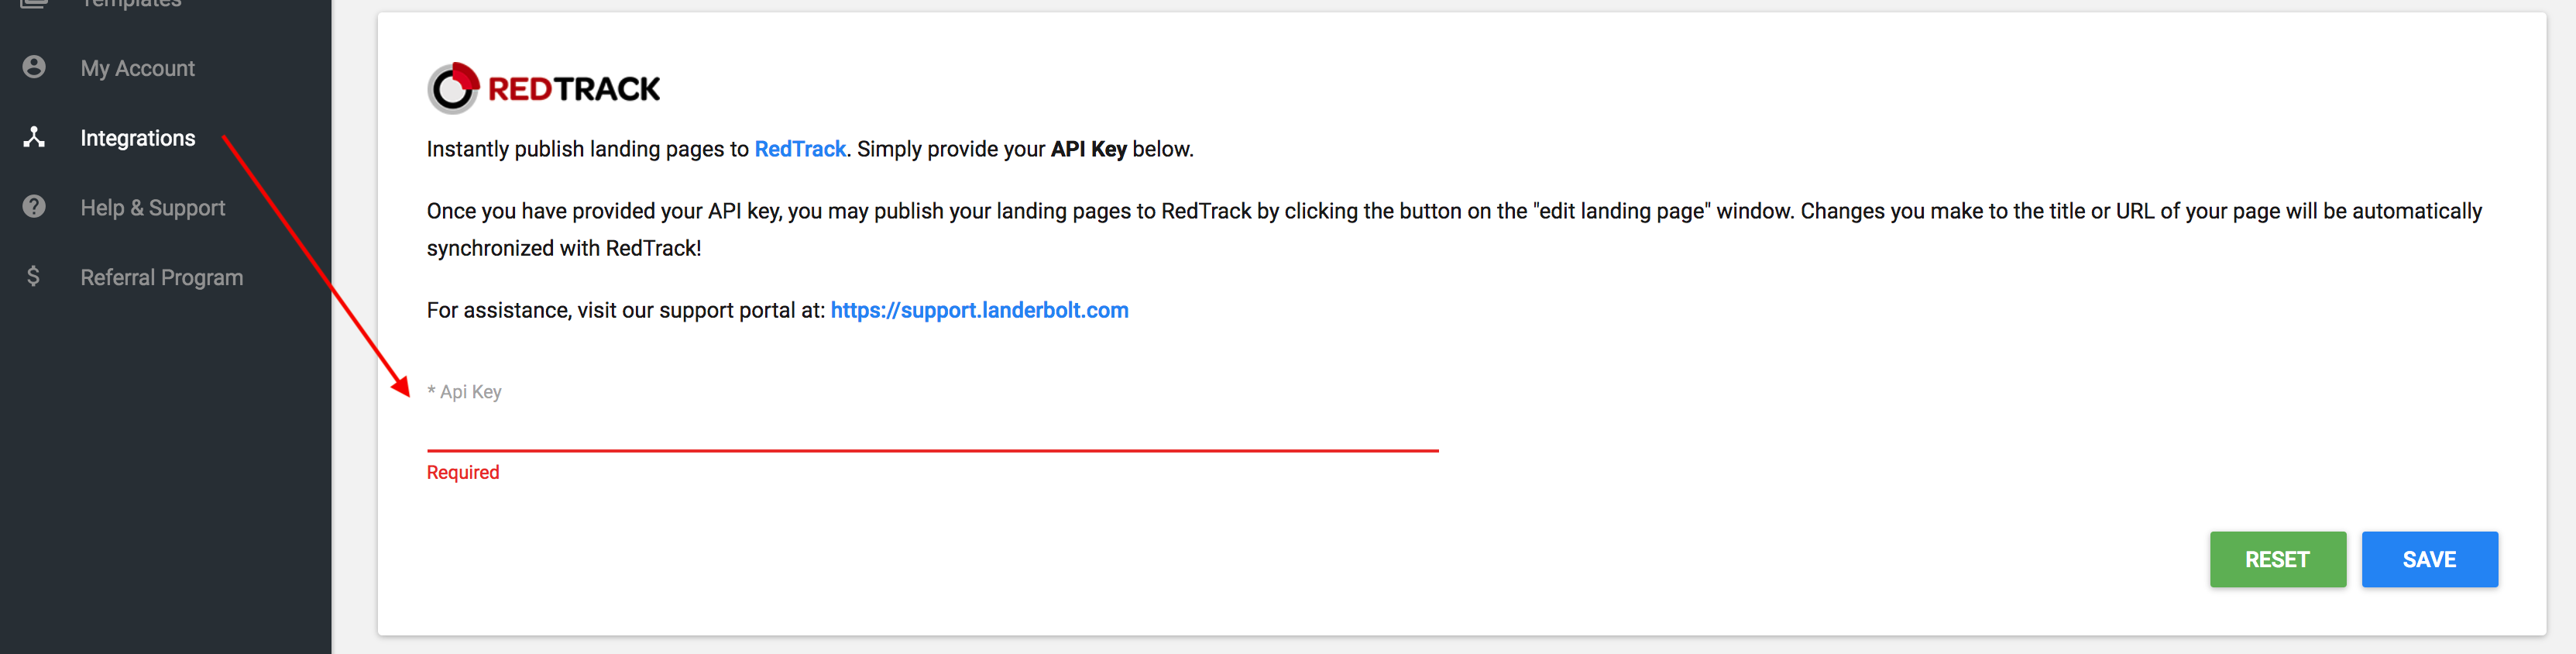 redtrack landing page